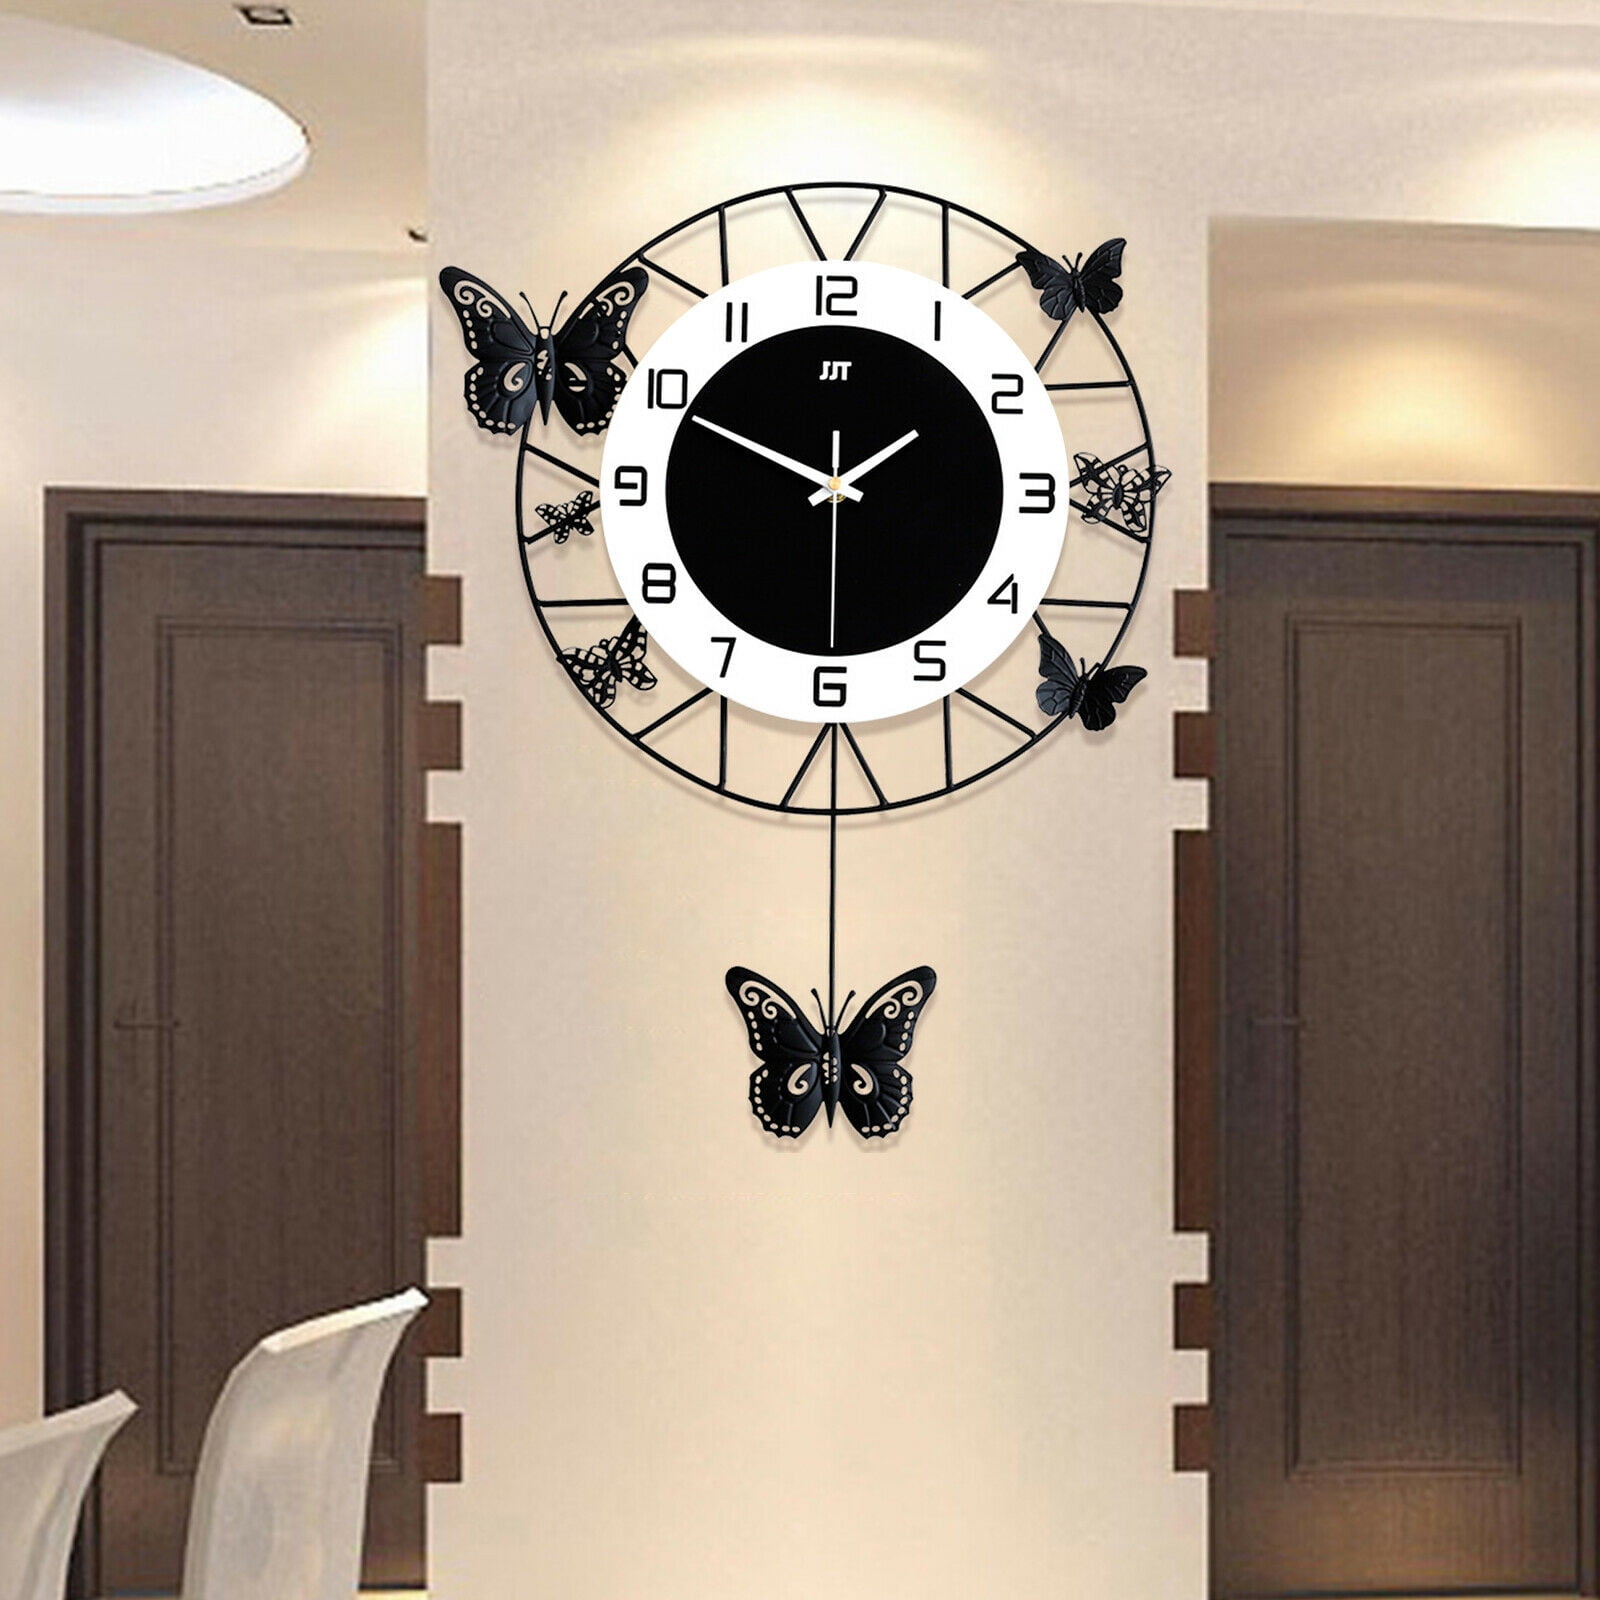 Black Kitchen Wall Clock Silent Home Decor Ornament Accessories Gifts for Dad 